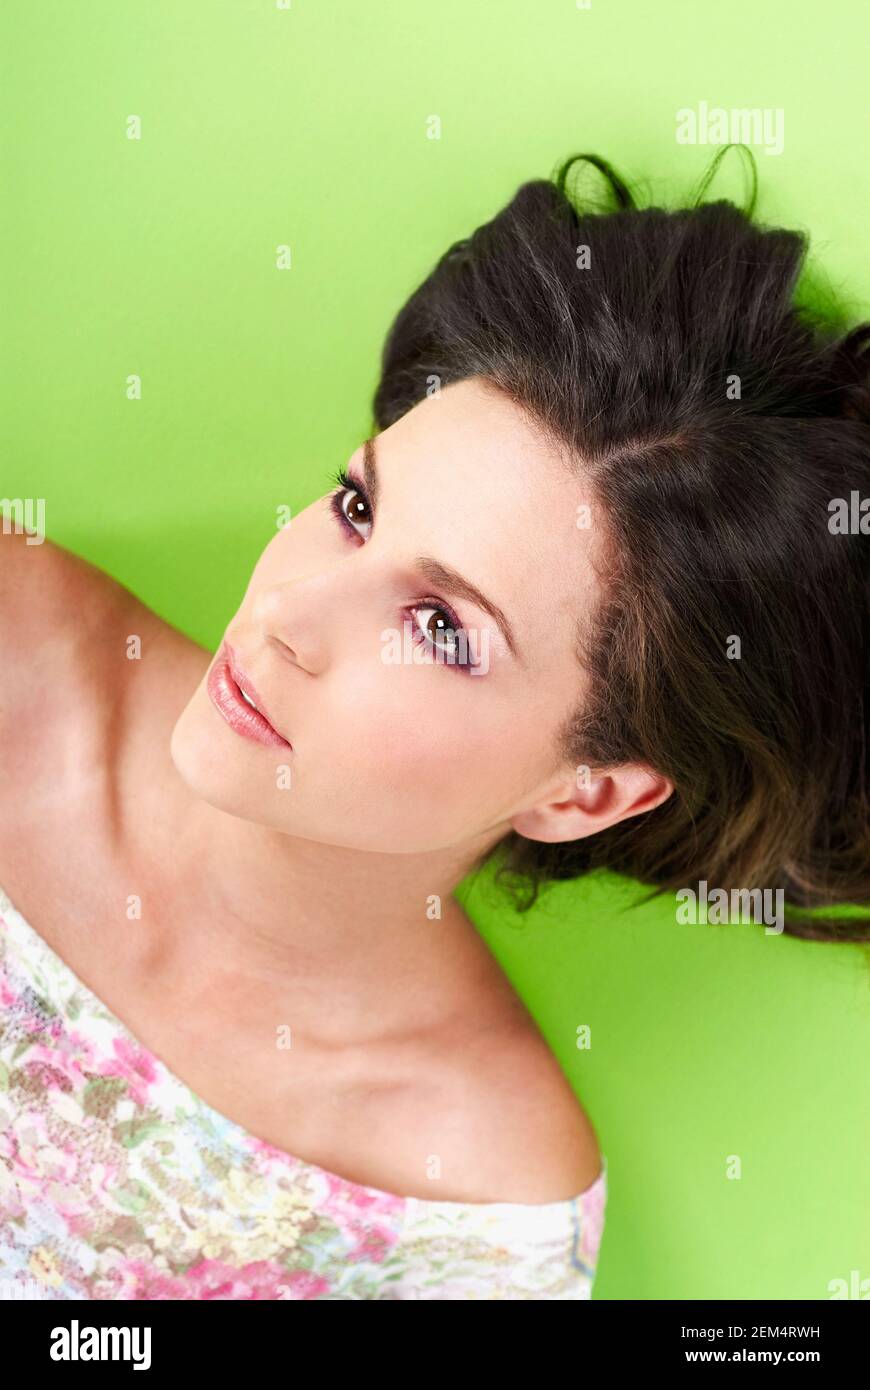 High angle view of a young woman lying down Stock Photo